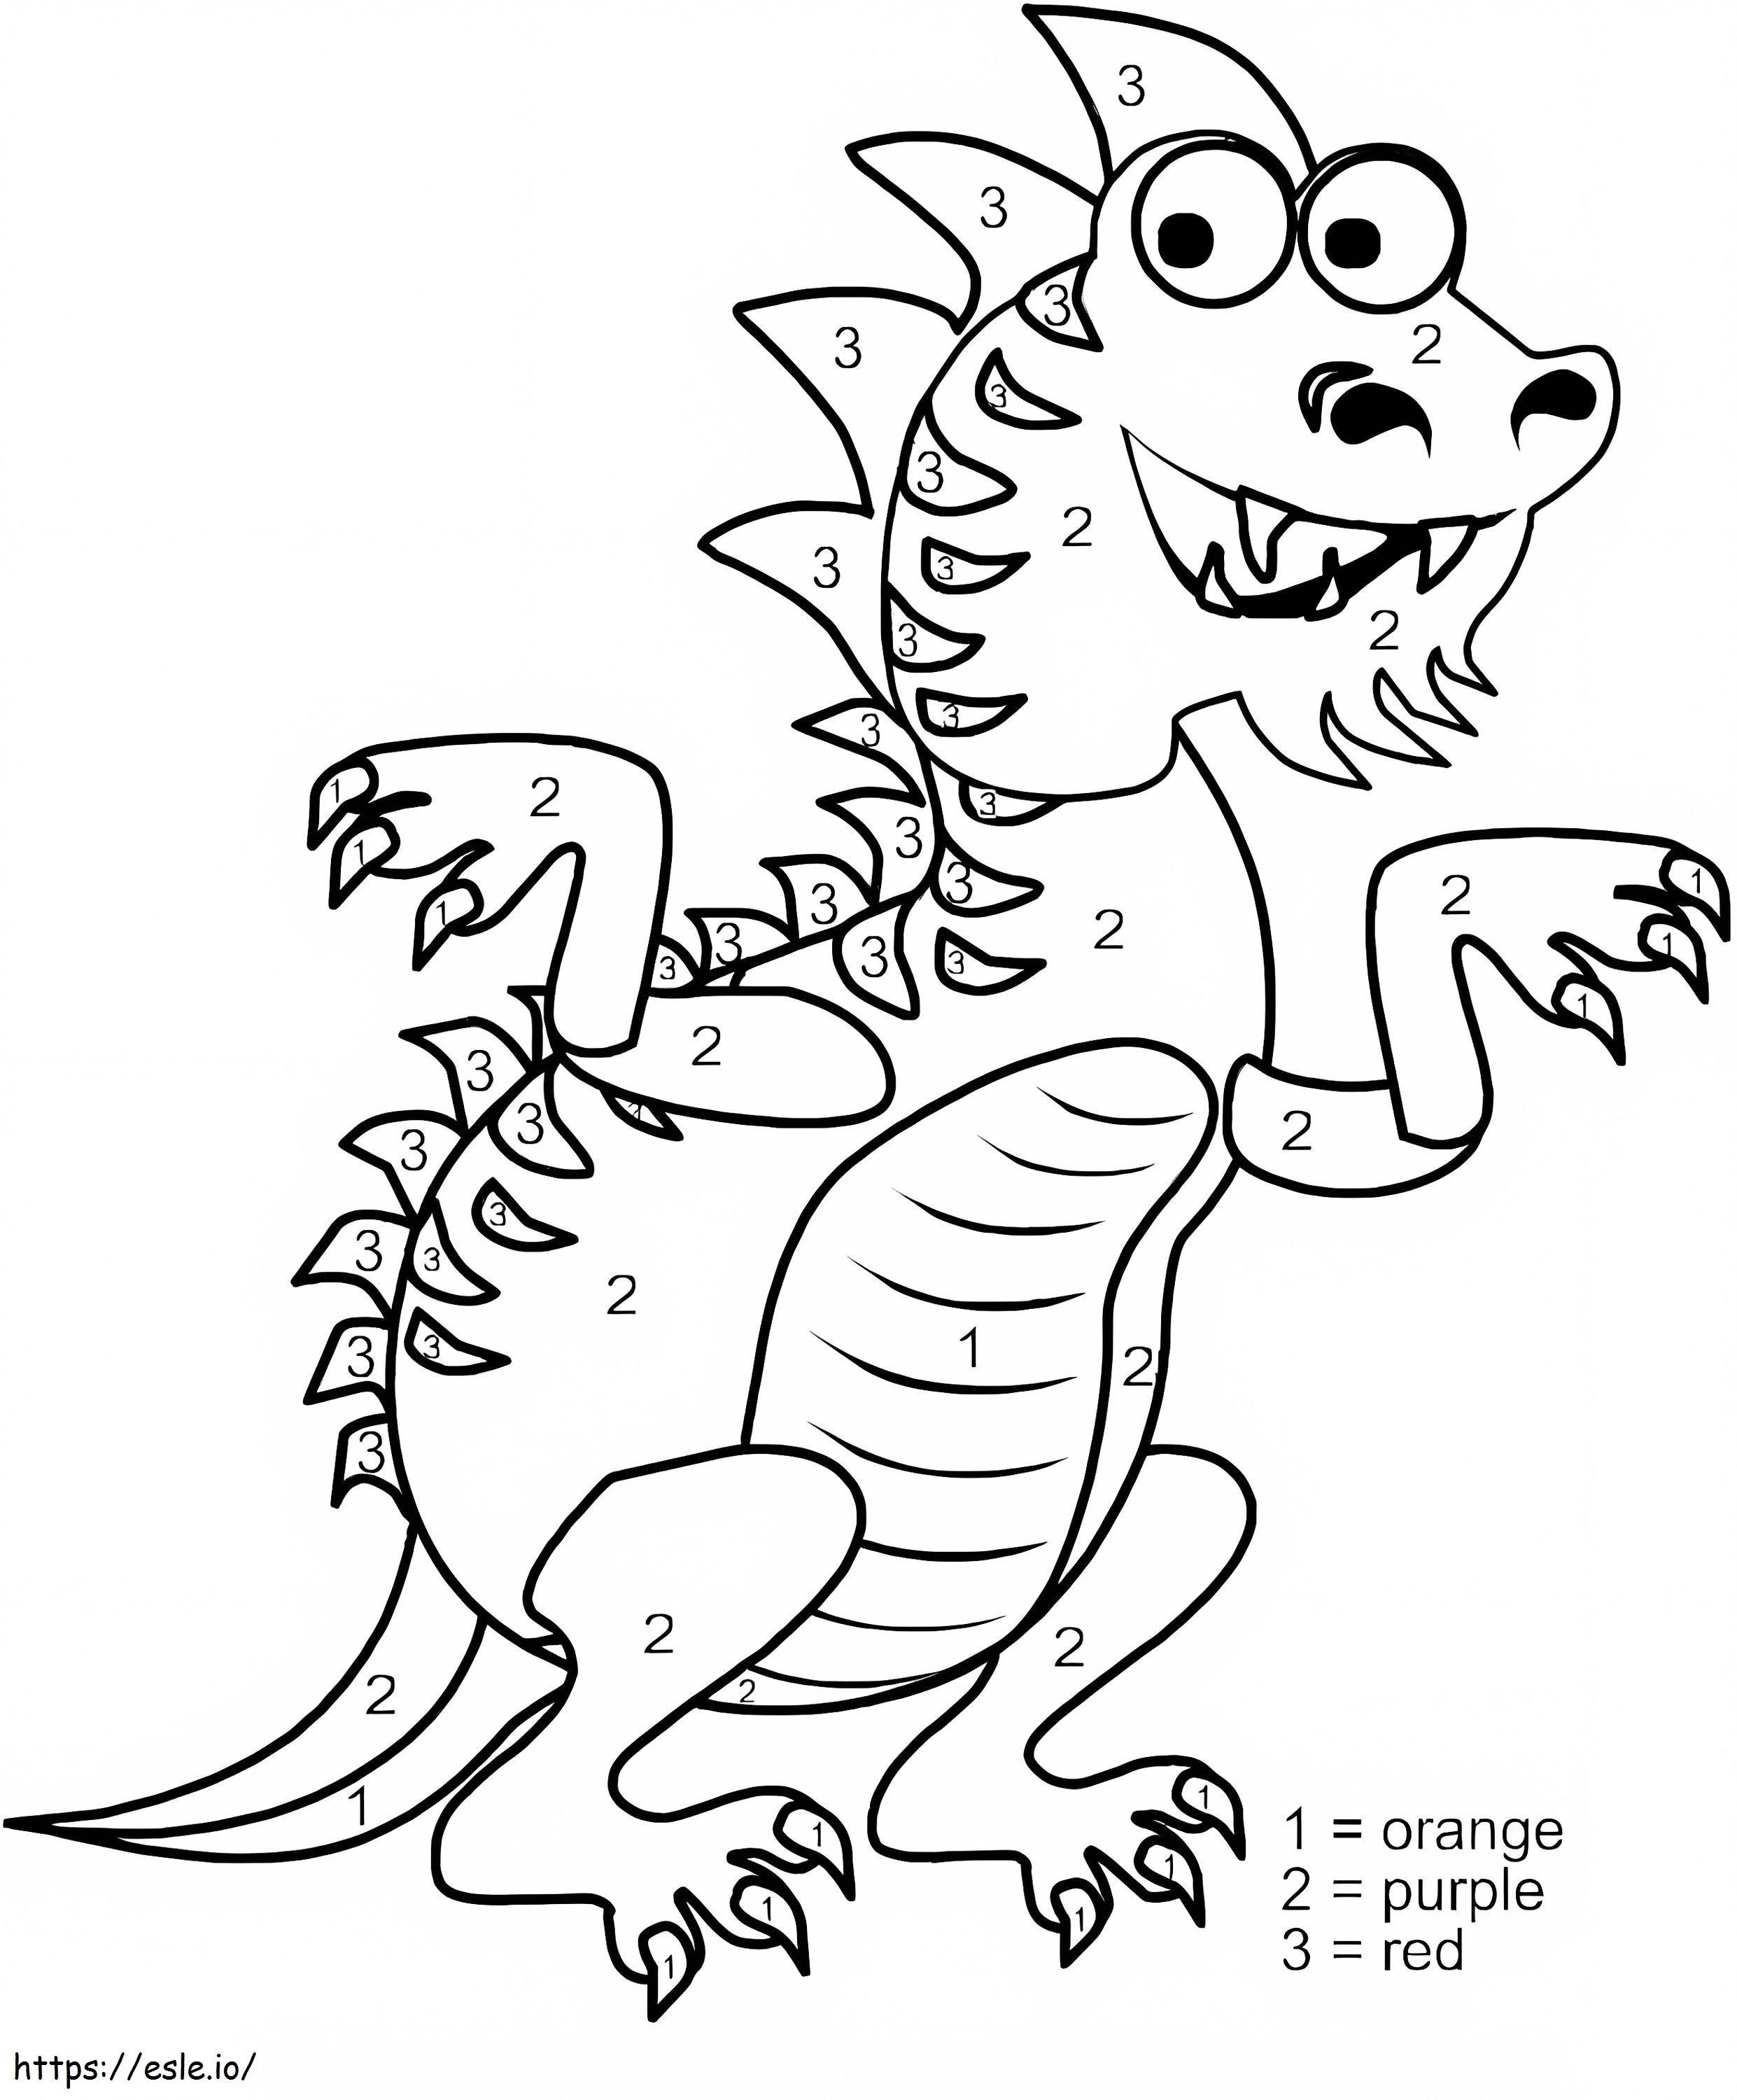 Fun Dragon Color By Number coloring page